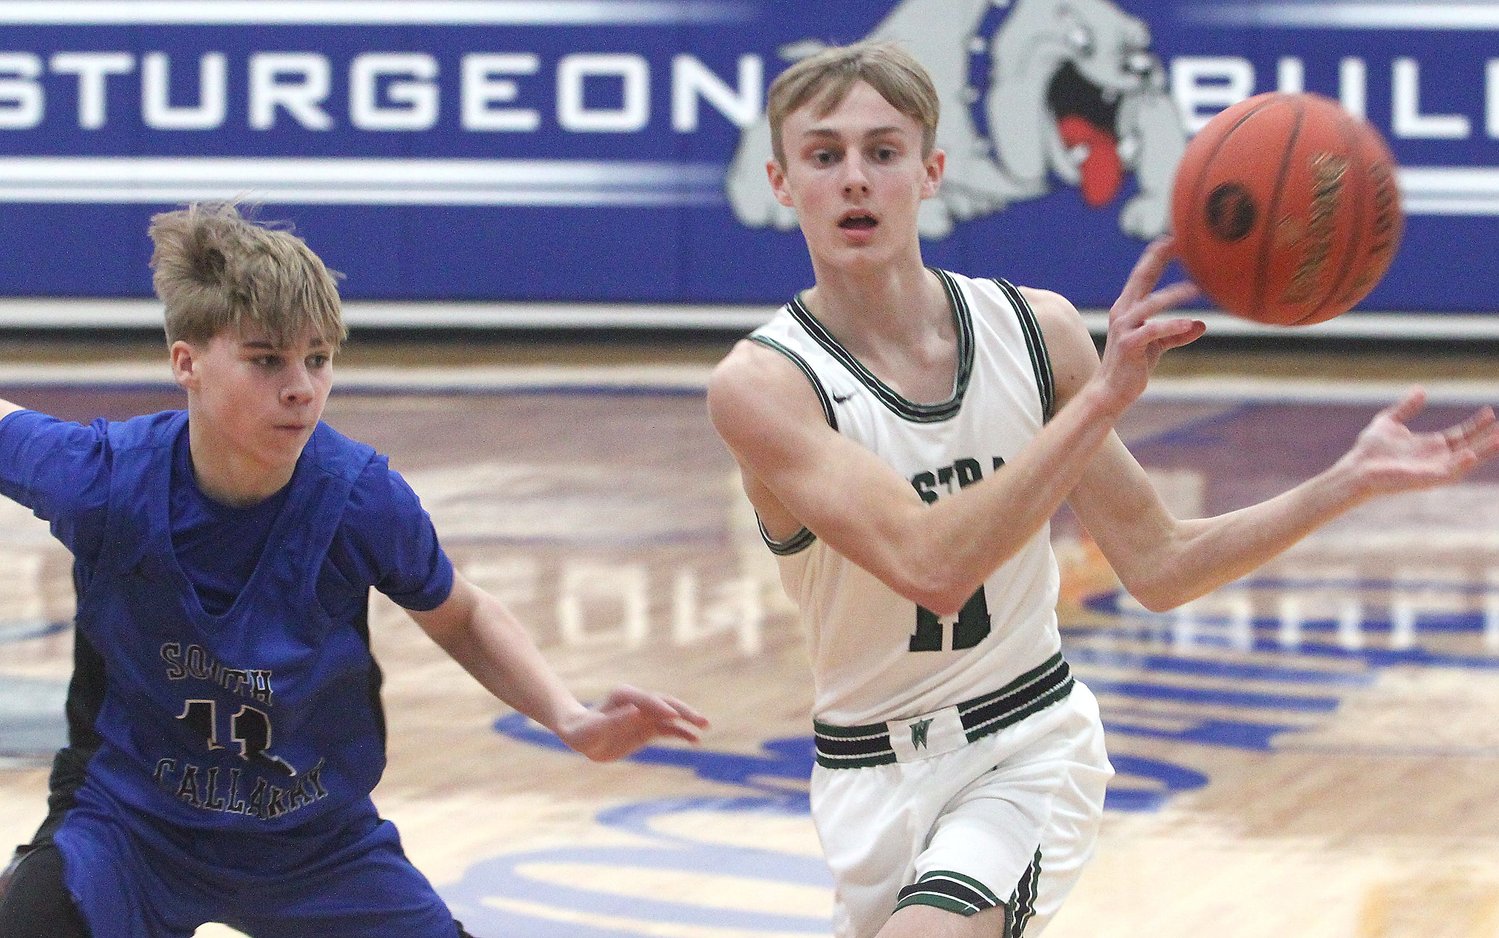 Westran High School junior Trey Marble makes a 'no-look' pass while being defended by South Callaway's Tayber Gray during Thursday's semifinal game of the Sturgeon Invitational. Marble supplied three 3-pointers and 11 points to help the top-seed Hornets win 67-49.